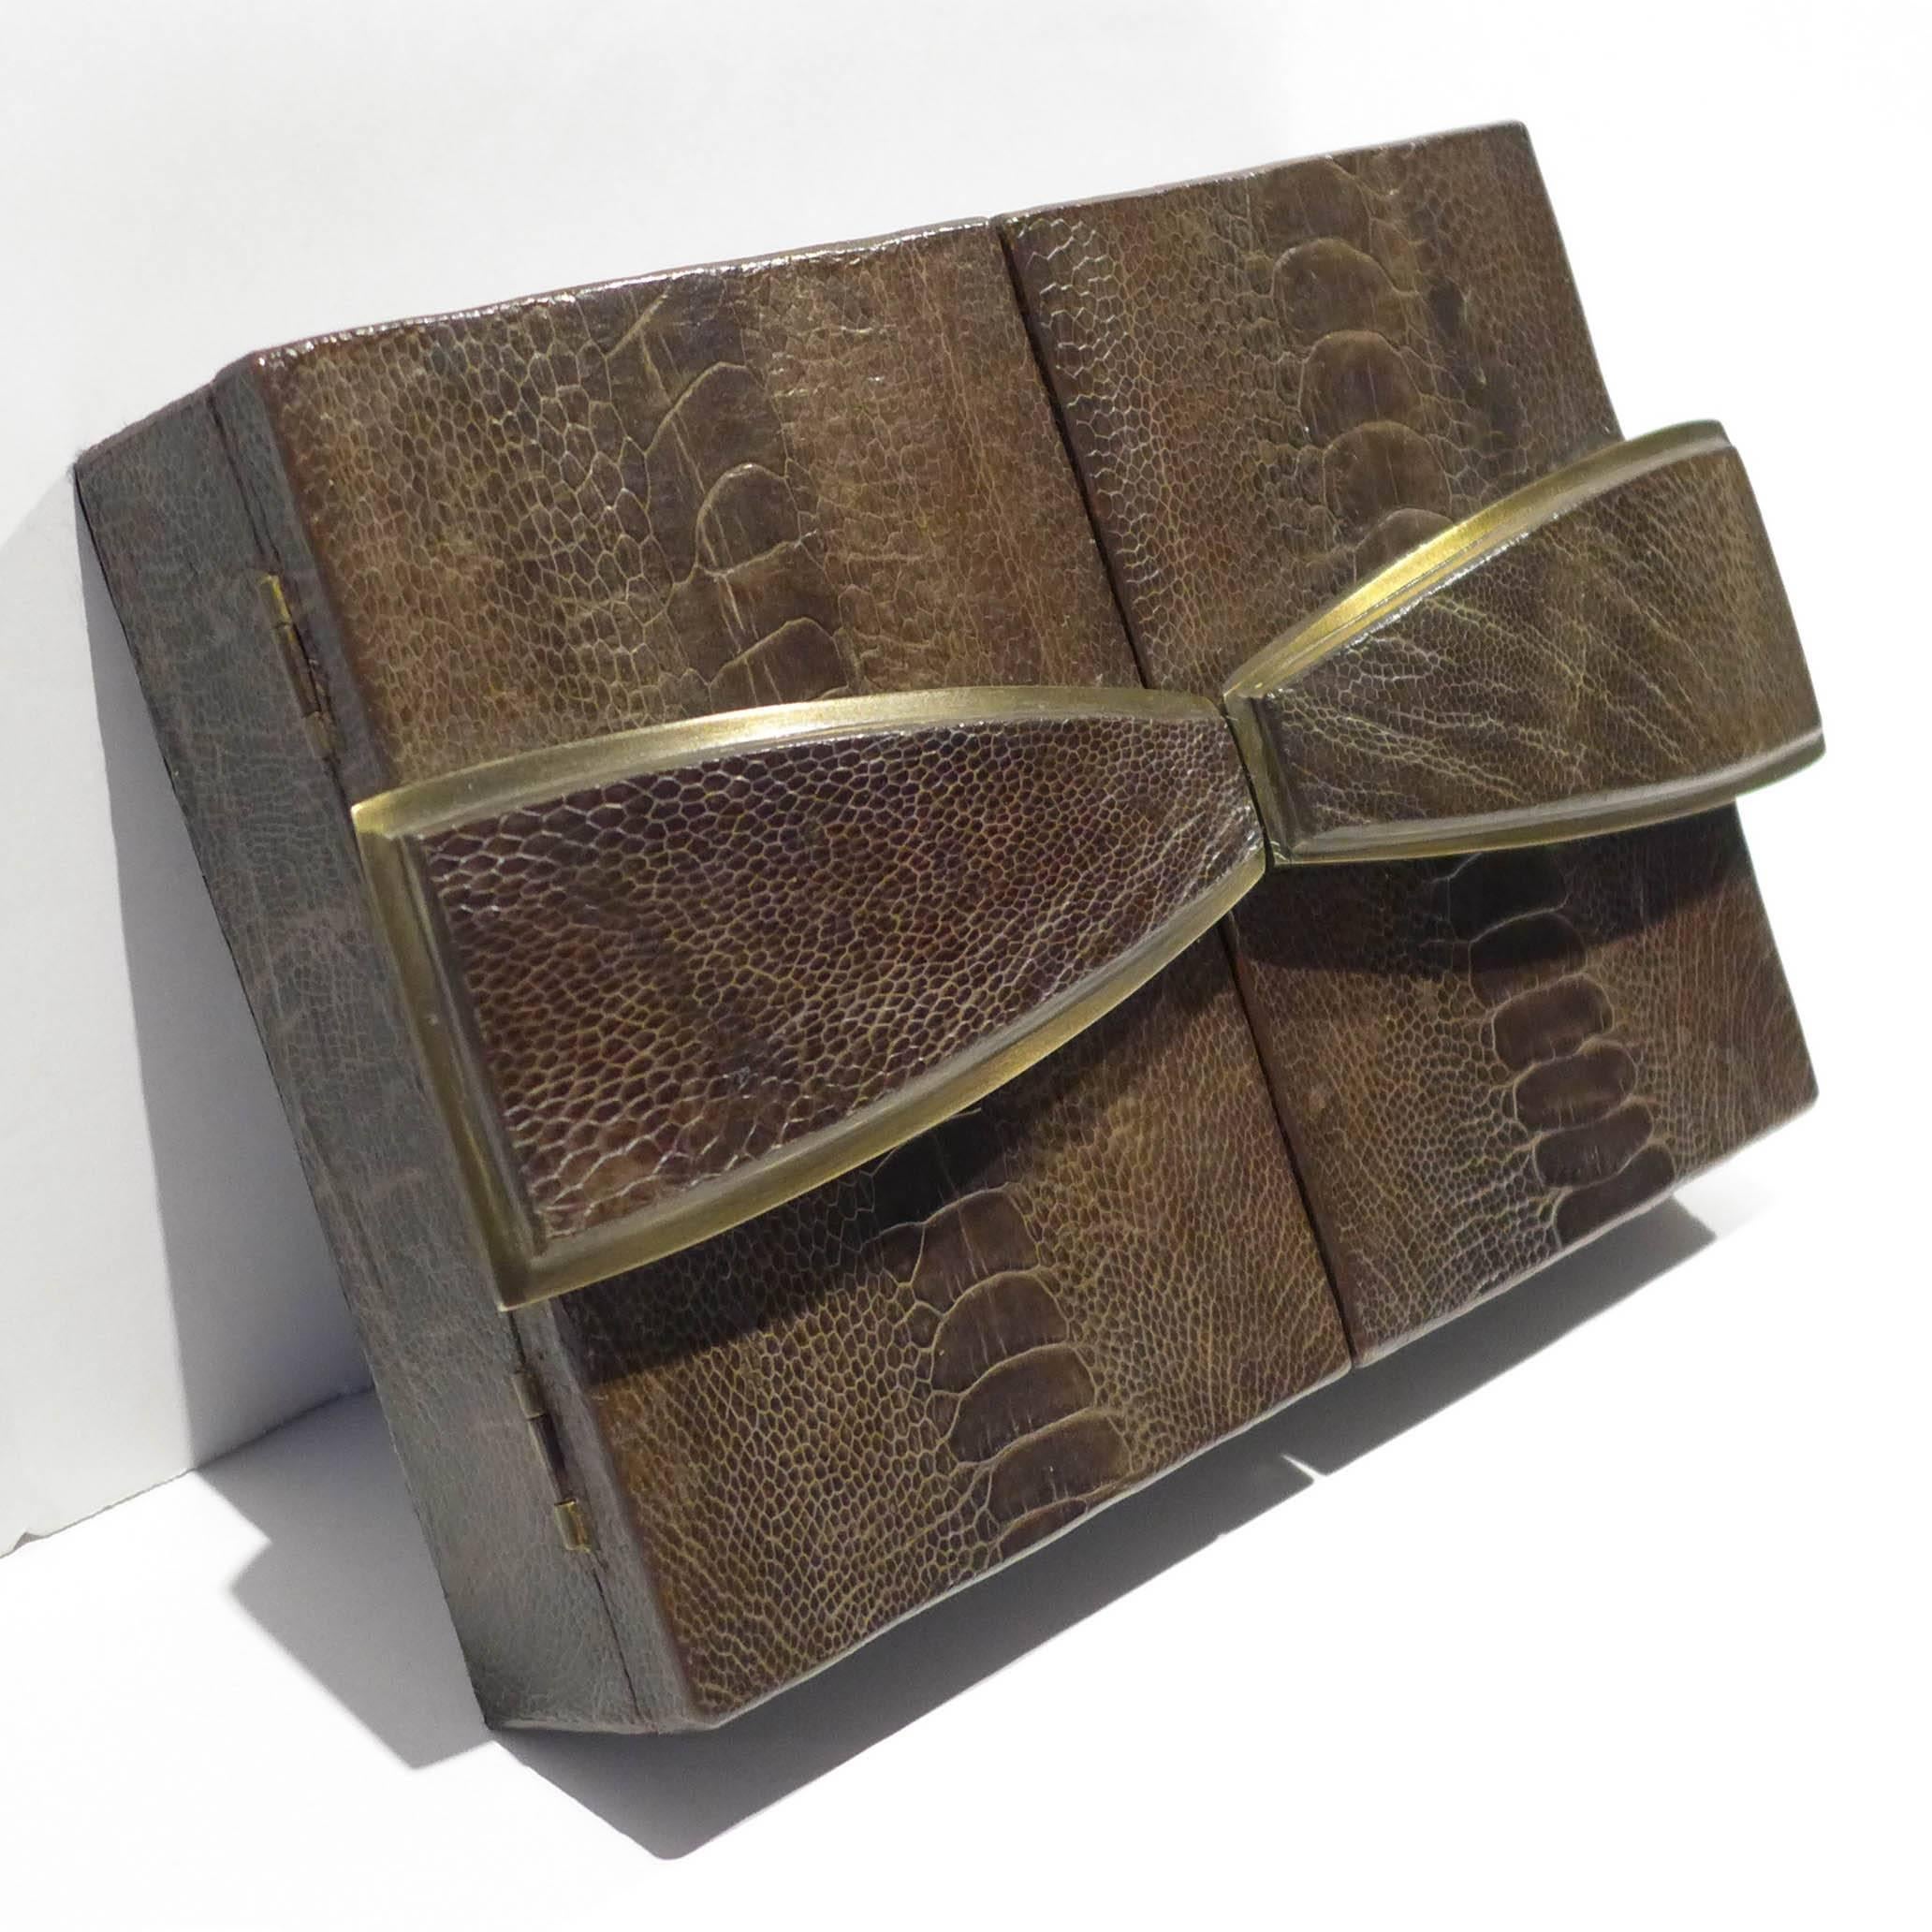 Handmade jewelry box in an Art Deco style, of ostrich leather and brass with wooden interior. A luxurious production by Ria and Yiouri Augousti, circa 1990s, stamped mark underneath.